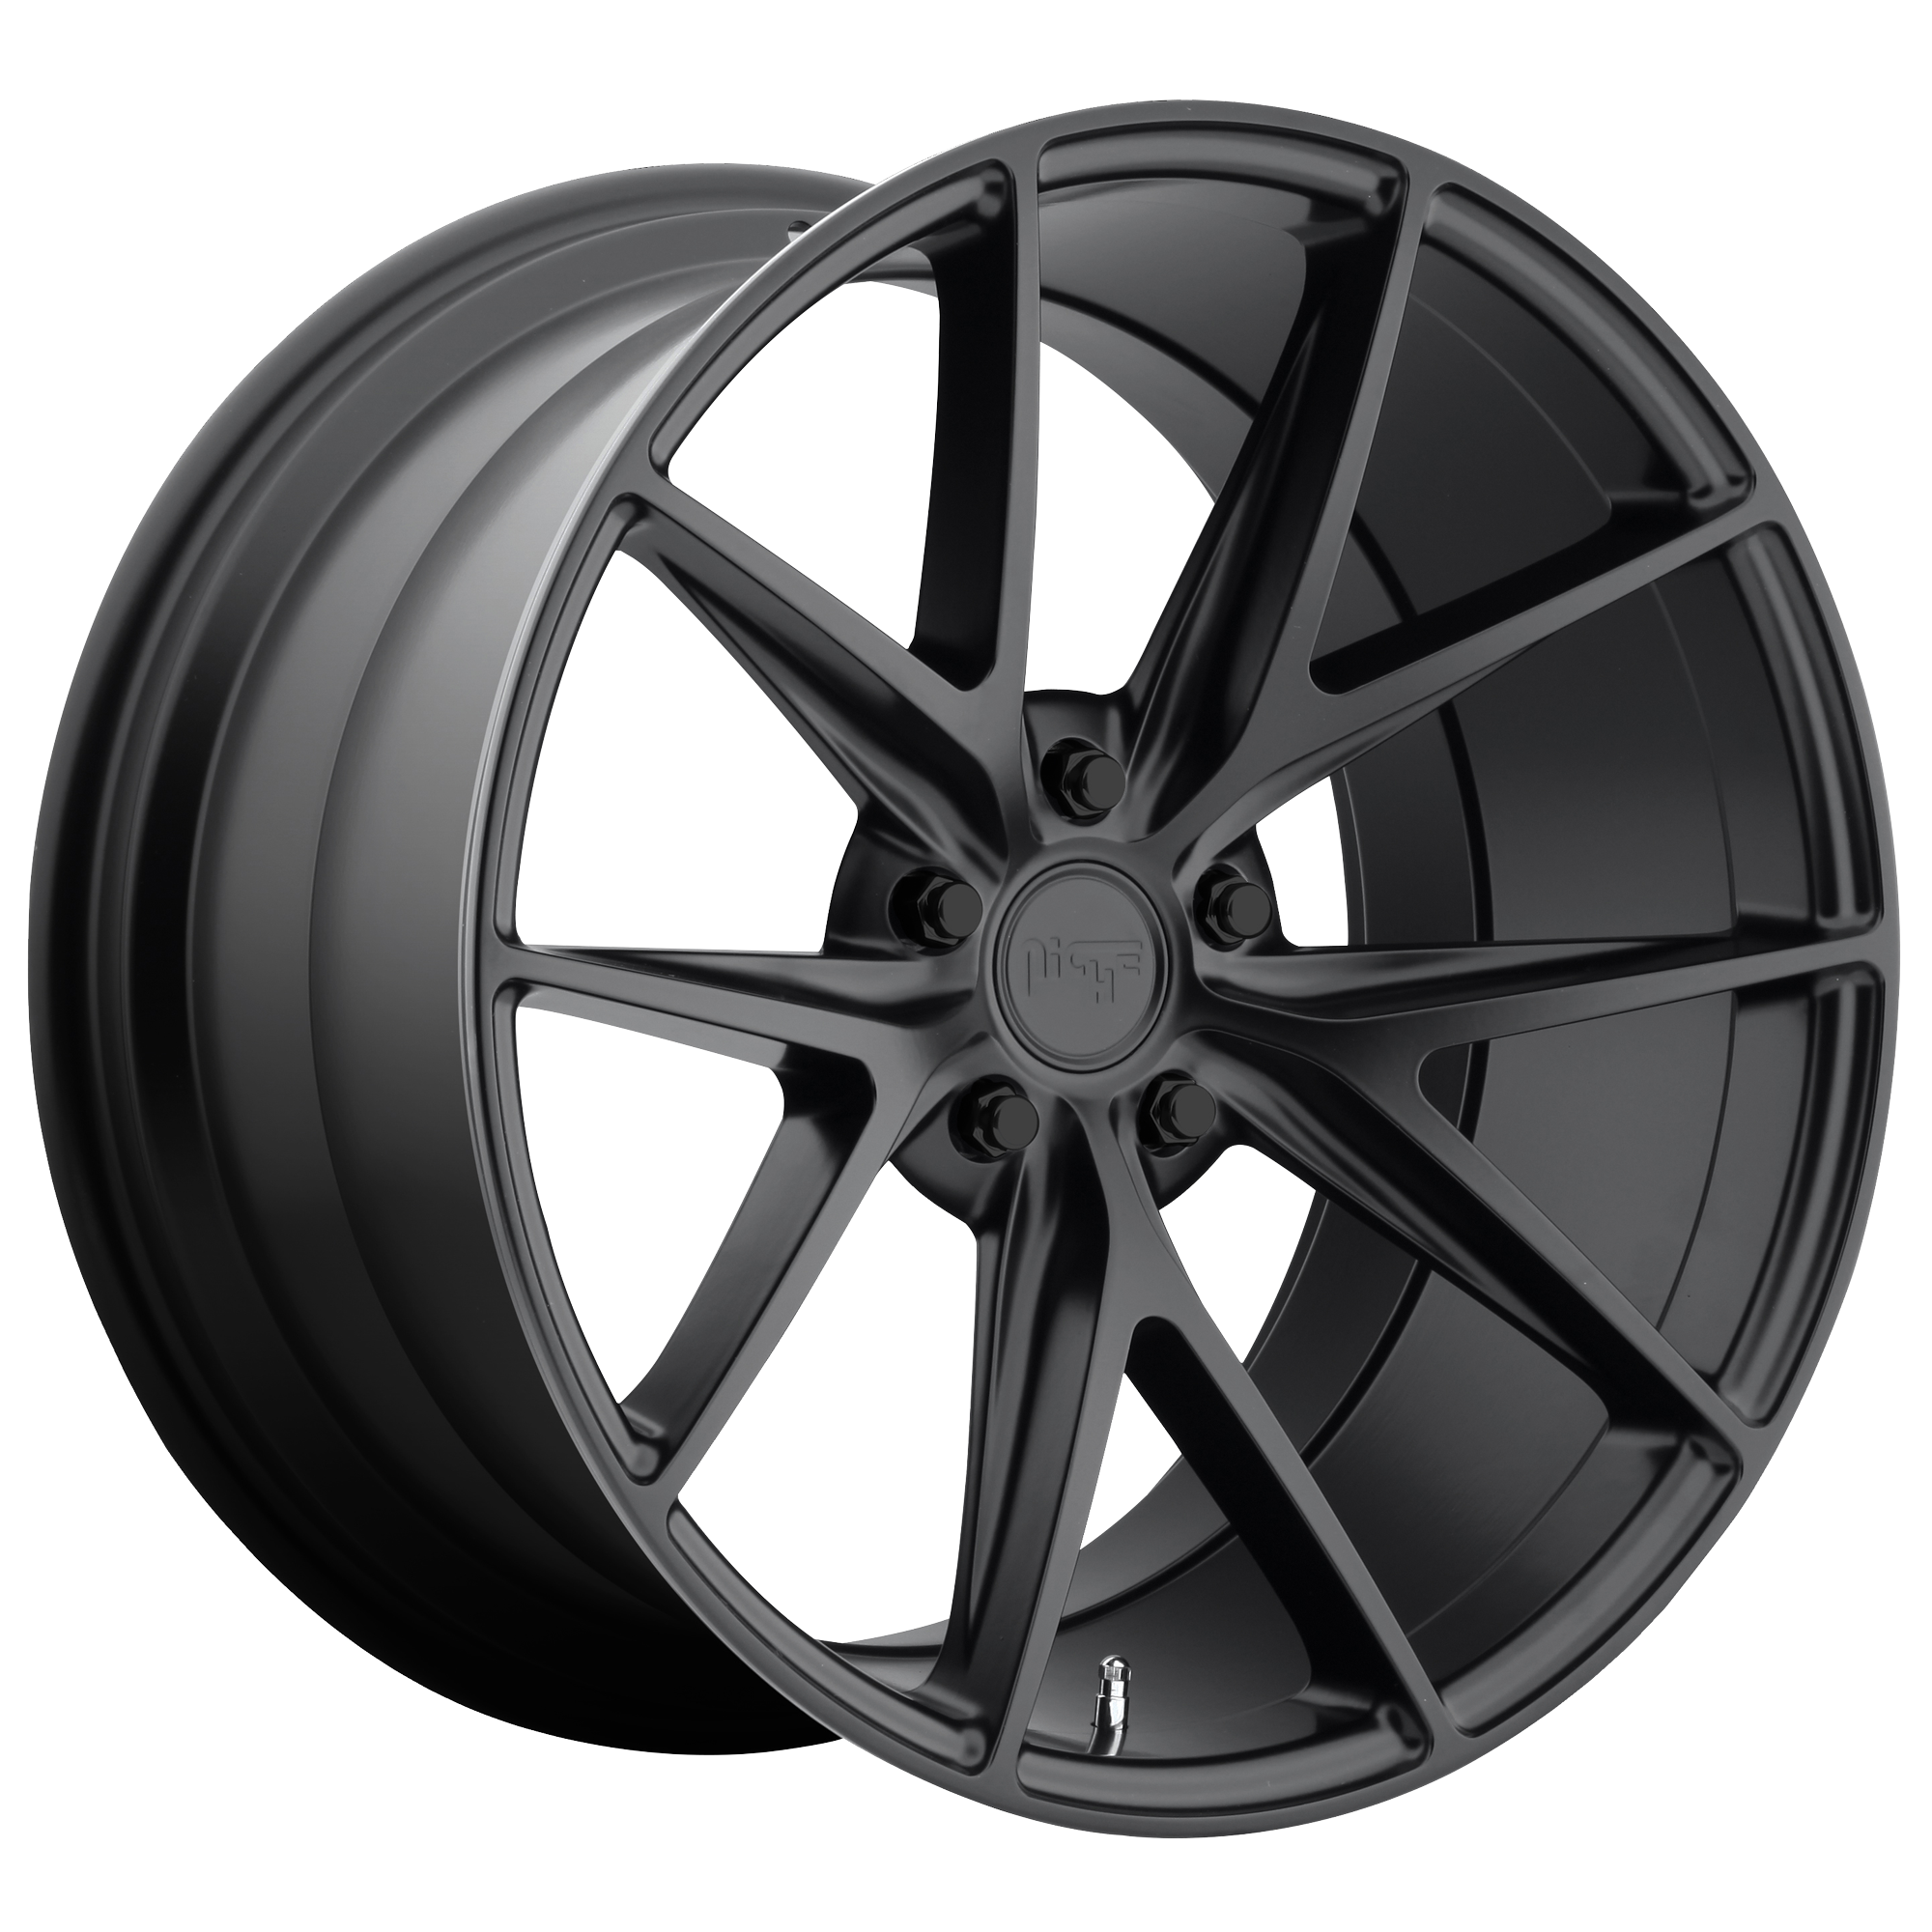 MISANO 17x8 5x112.00 MATTE BLACK (40 mm) - Tires and Engine Performance